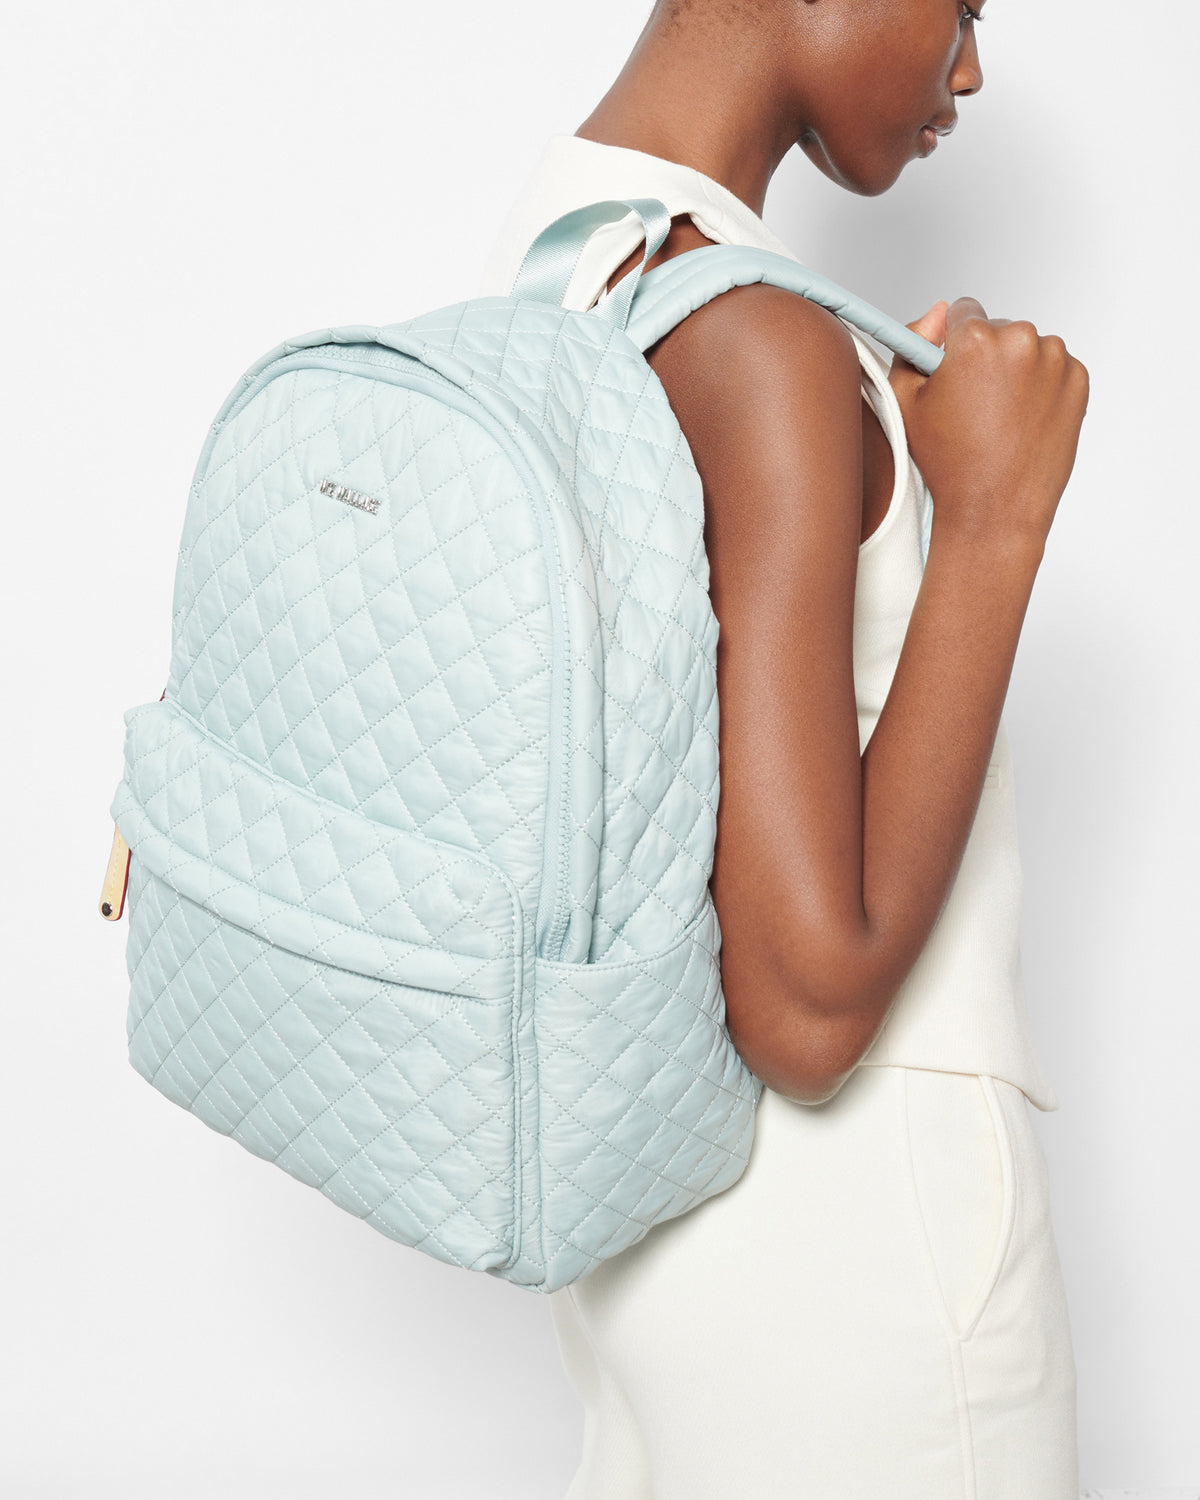 MZ Wallace Silver Blue Metro Backpack Deluxe